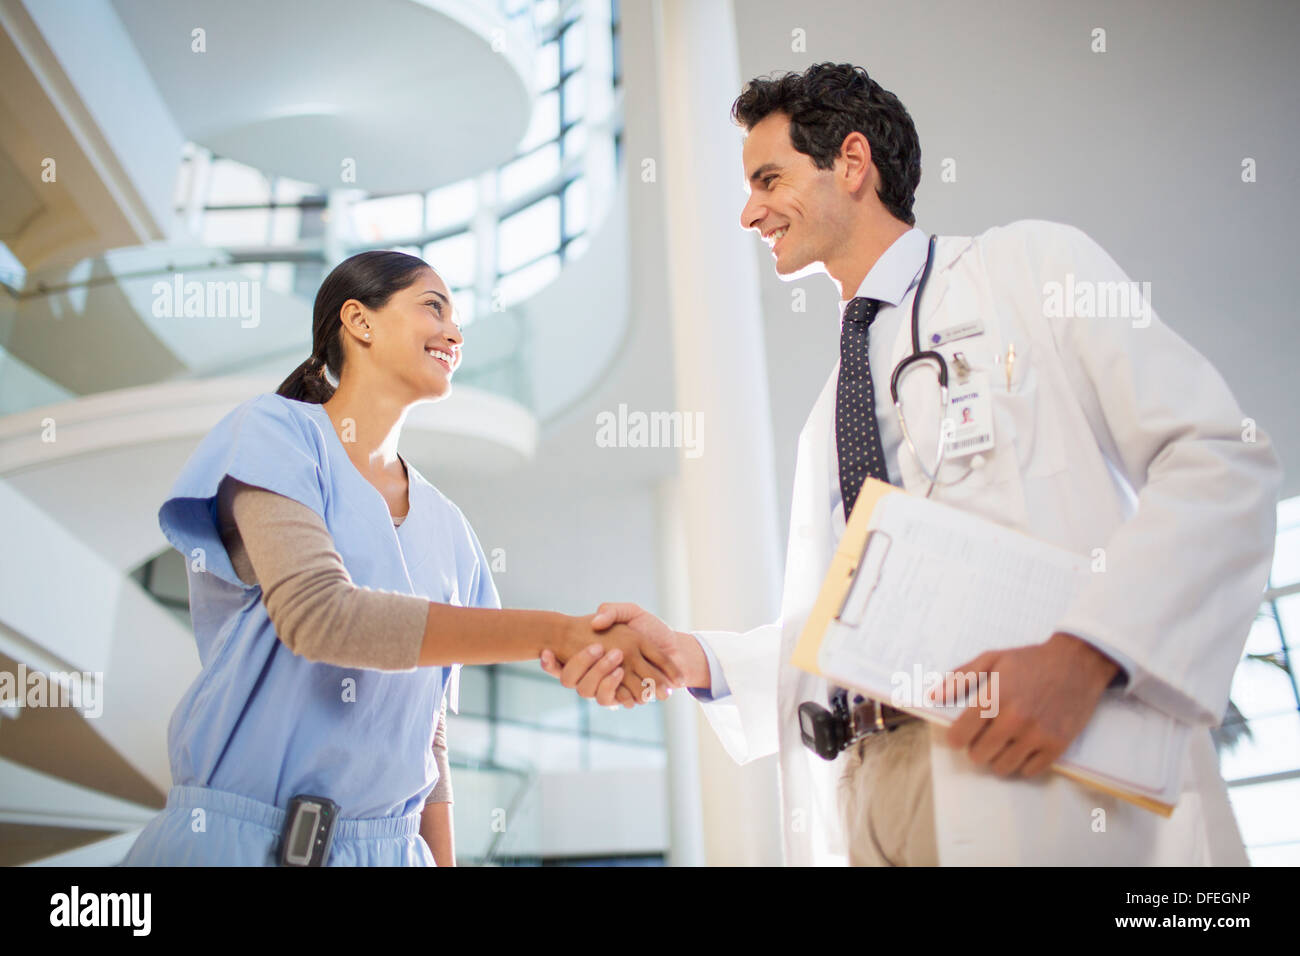 Doctor and nurse handshaking in hospital Stock Photo